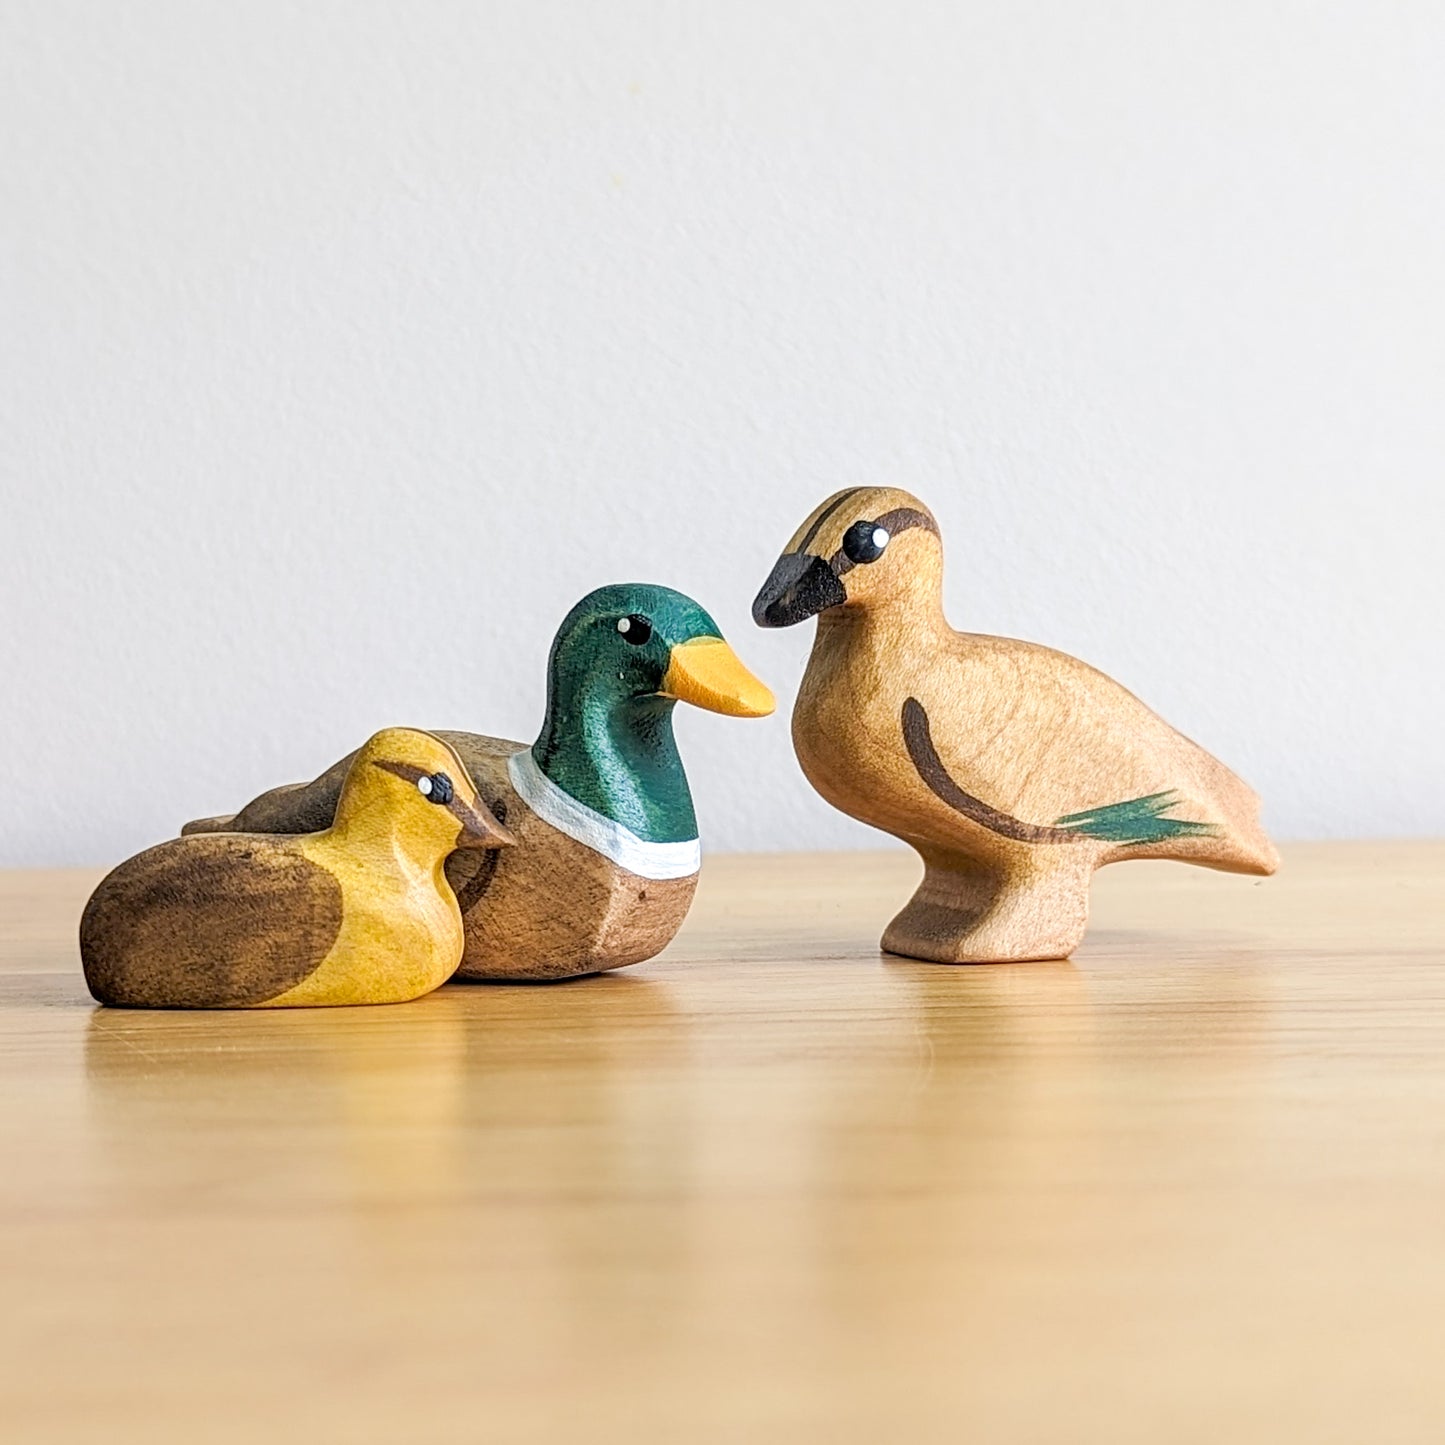 Duckling Wooden Toy